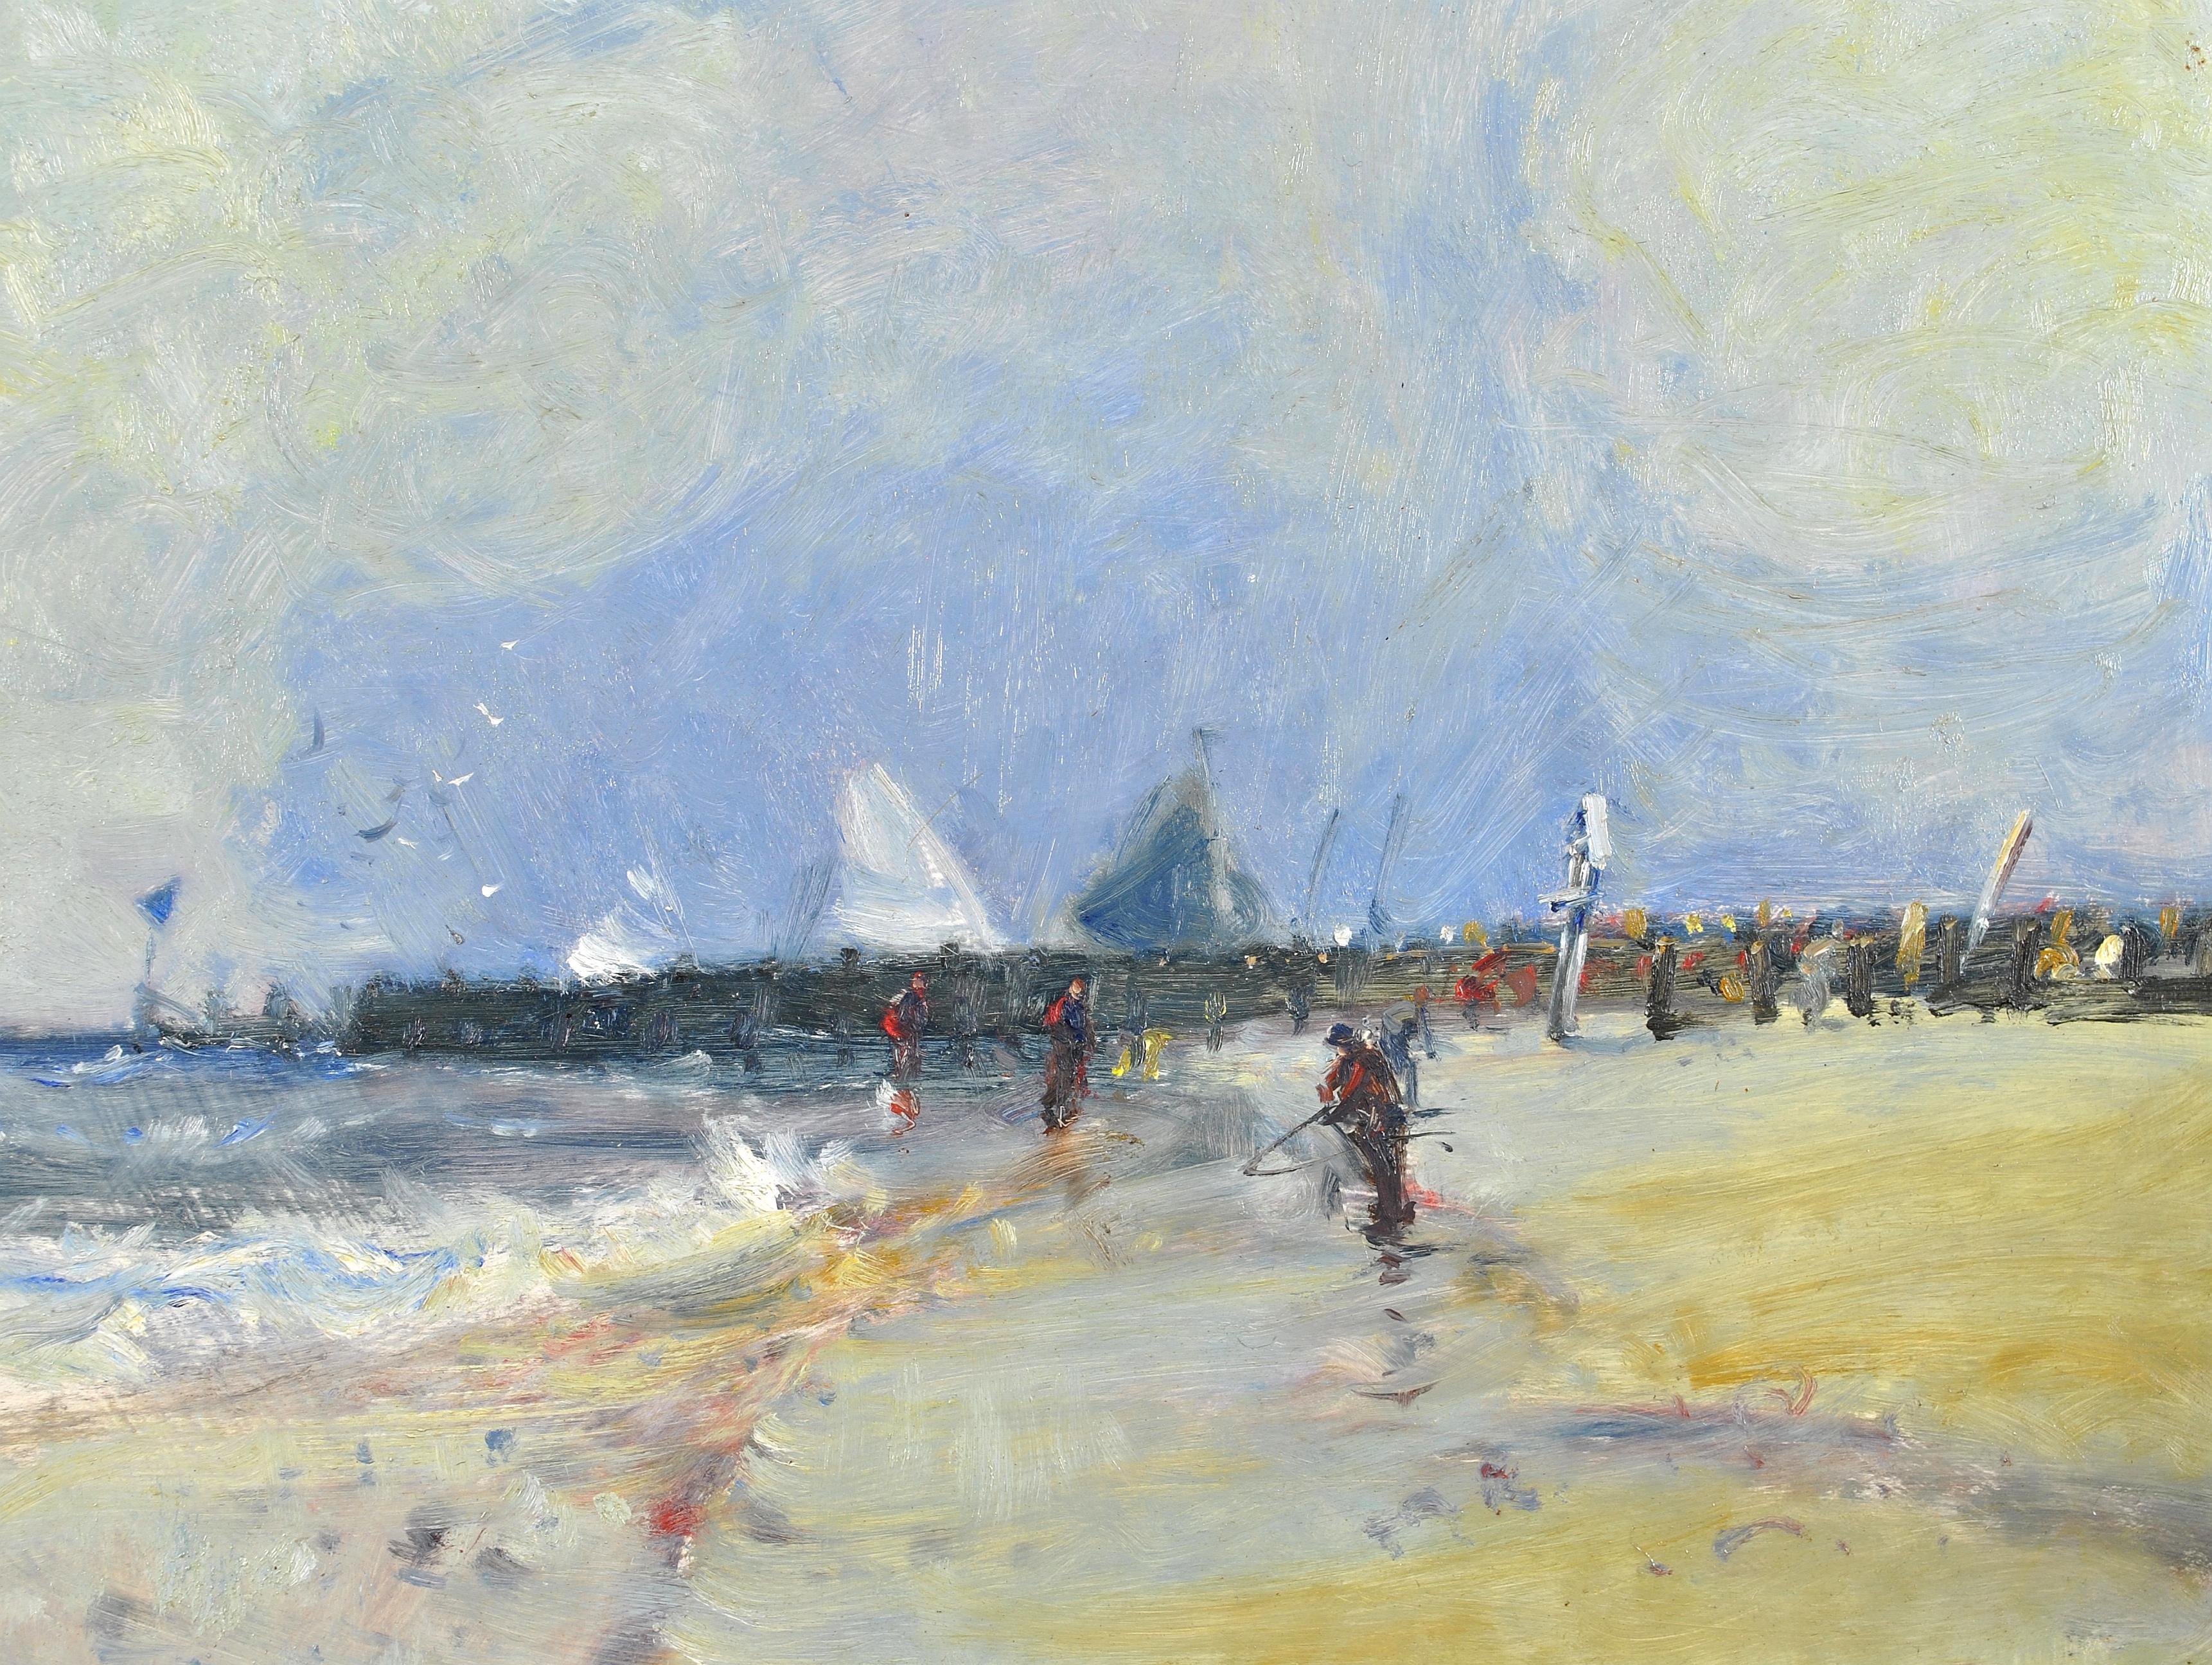 The Beach Groyne - English Impressionist Seascape, Oil on Board Painting - Gray Landscape Painting by Geoffrey Chatten